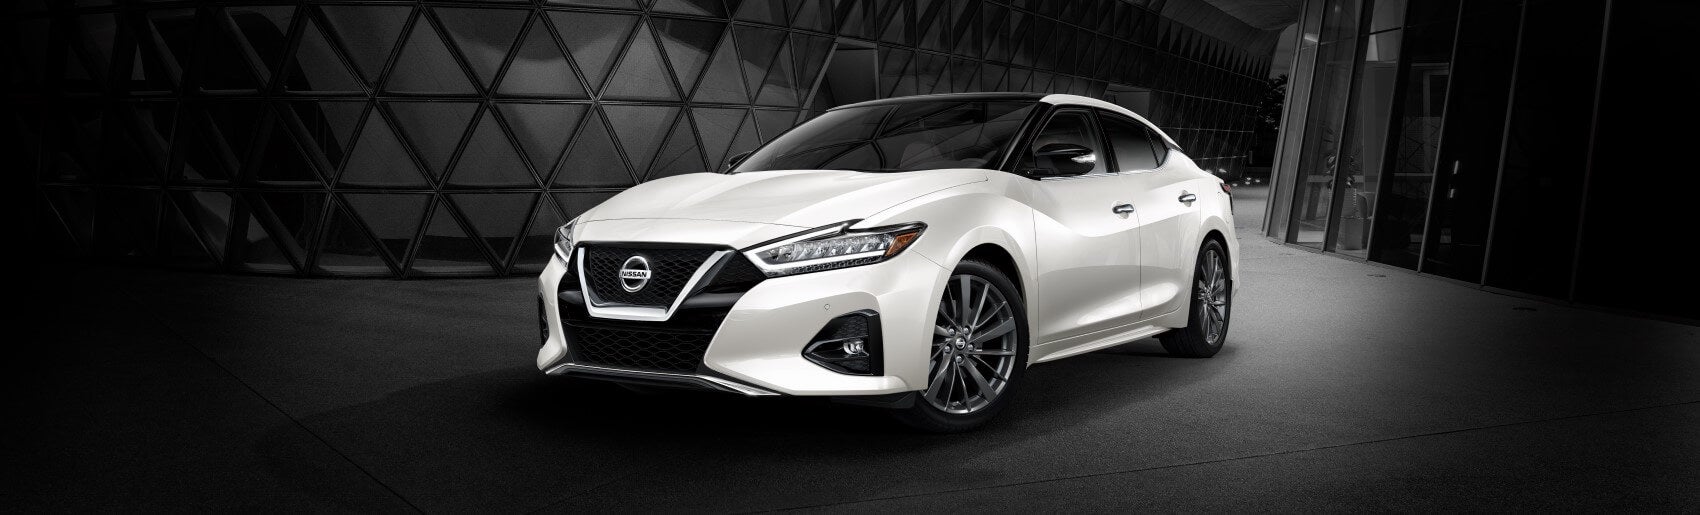 NISSAN MAXIMA SAFETY RATINGS